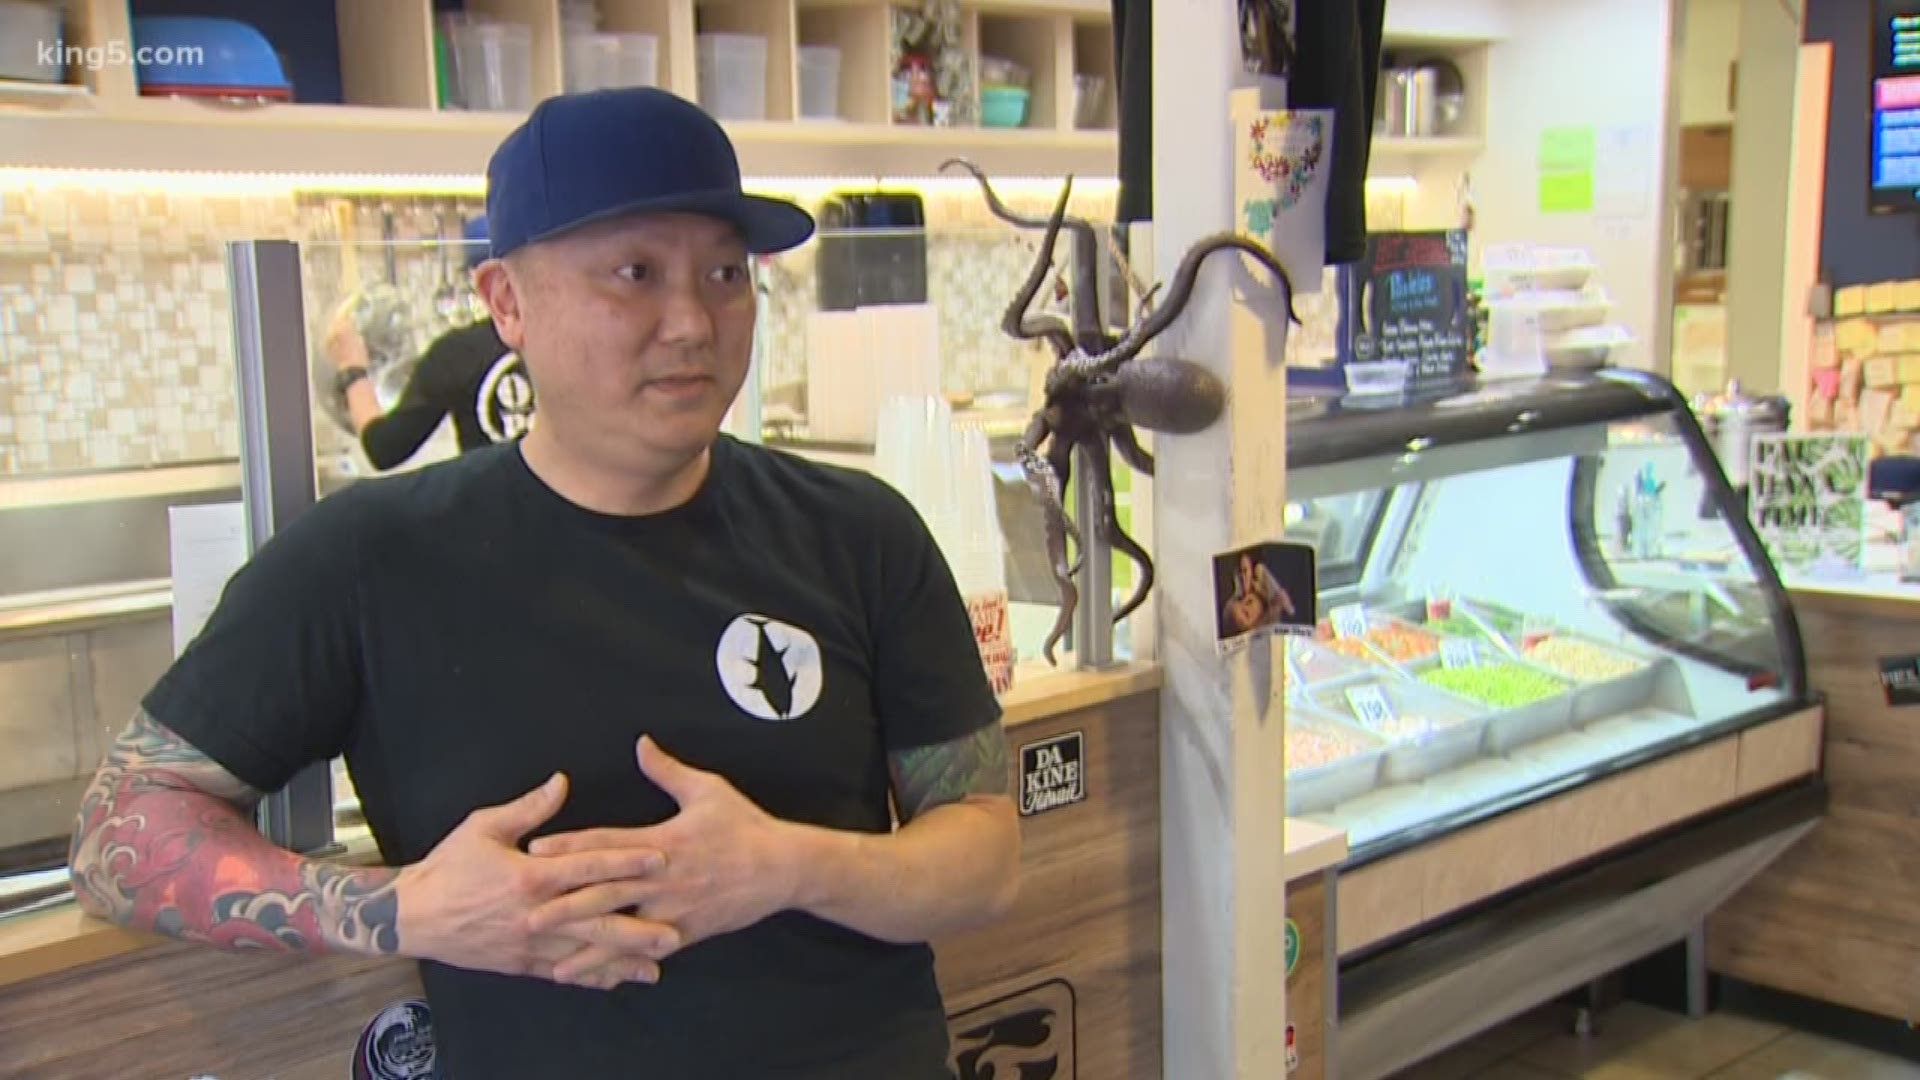 Neighbors helping neighbors: Steven Ono said he plans to hire one or two laid off restaurant workers who want to learn how to cut fish and make poke.